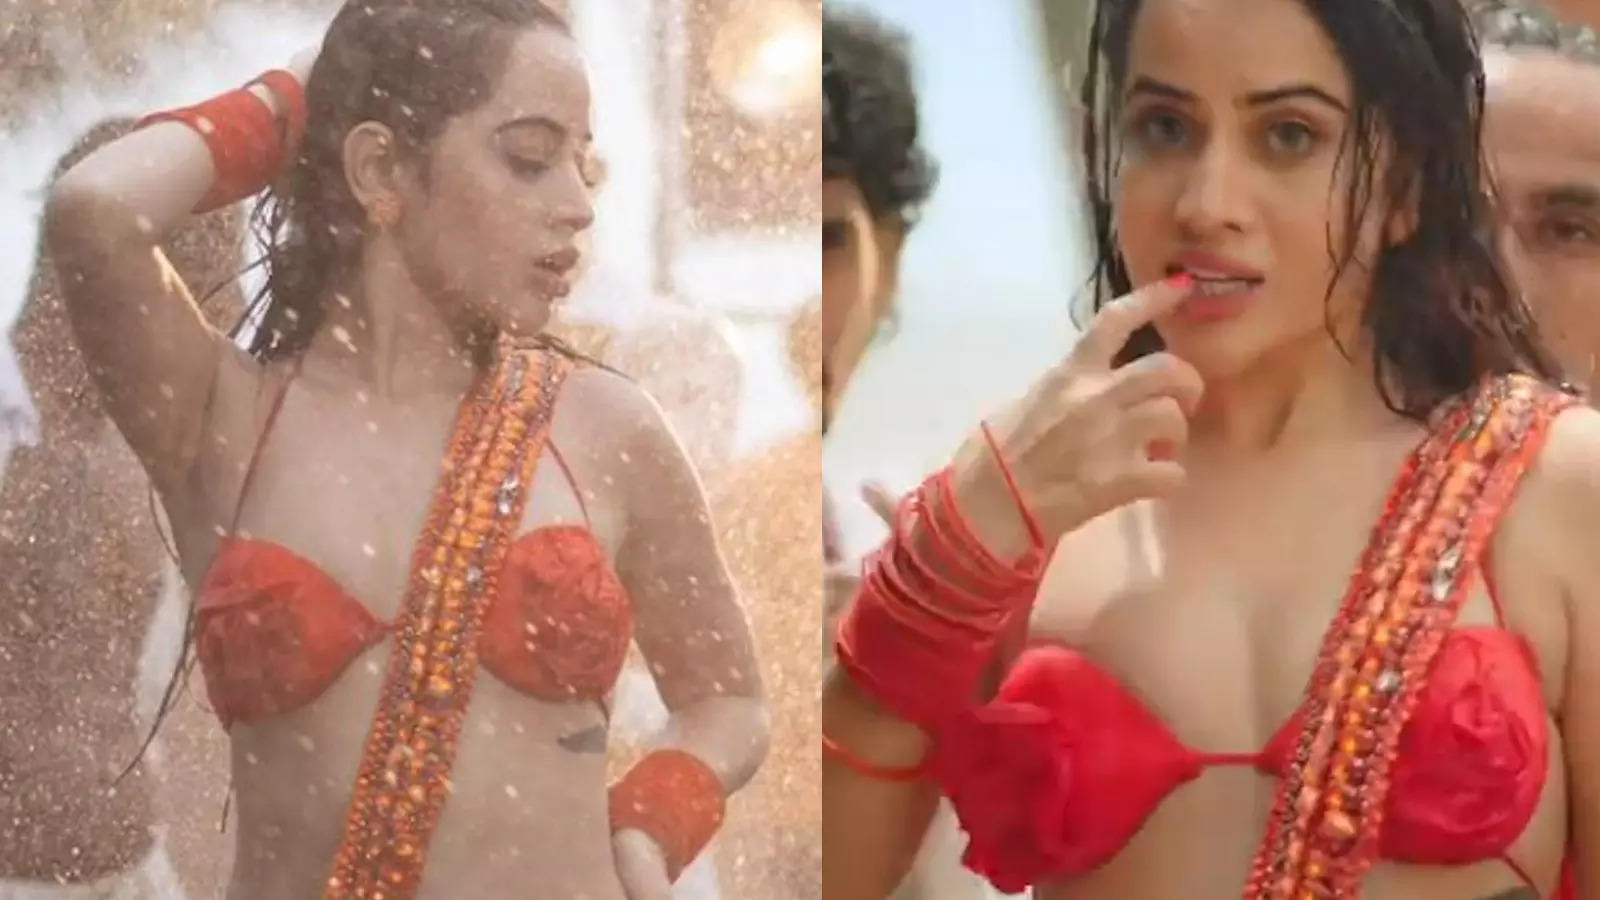 1600px x 900px - Urfi Javed Latest Video: OMG! Urfi Javed's revealing outfit in music video  'Haye Haye Yeh Majboori' lands her in legal trouble, complaint filed for  'sexually explicit' content